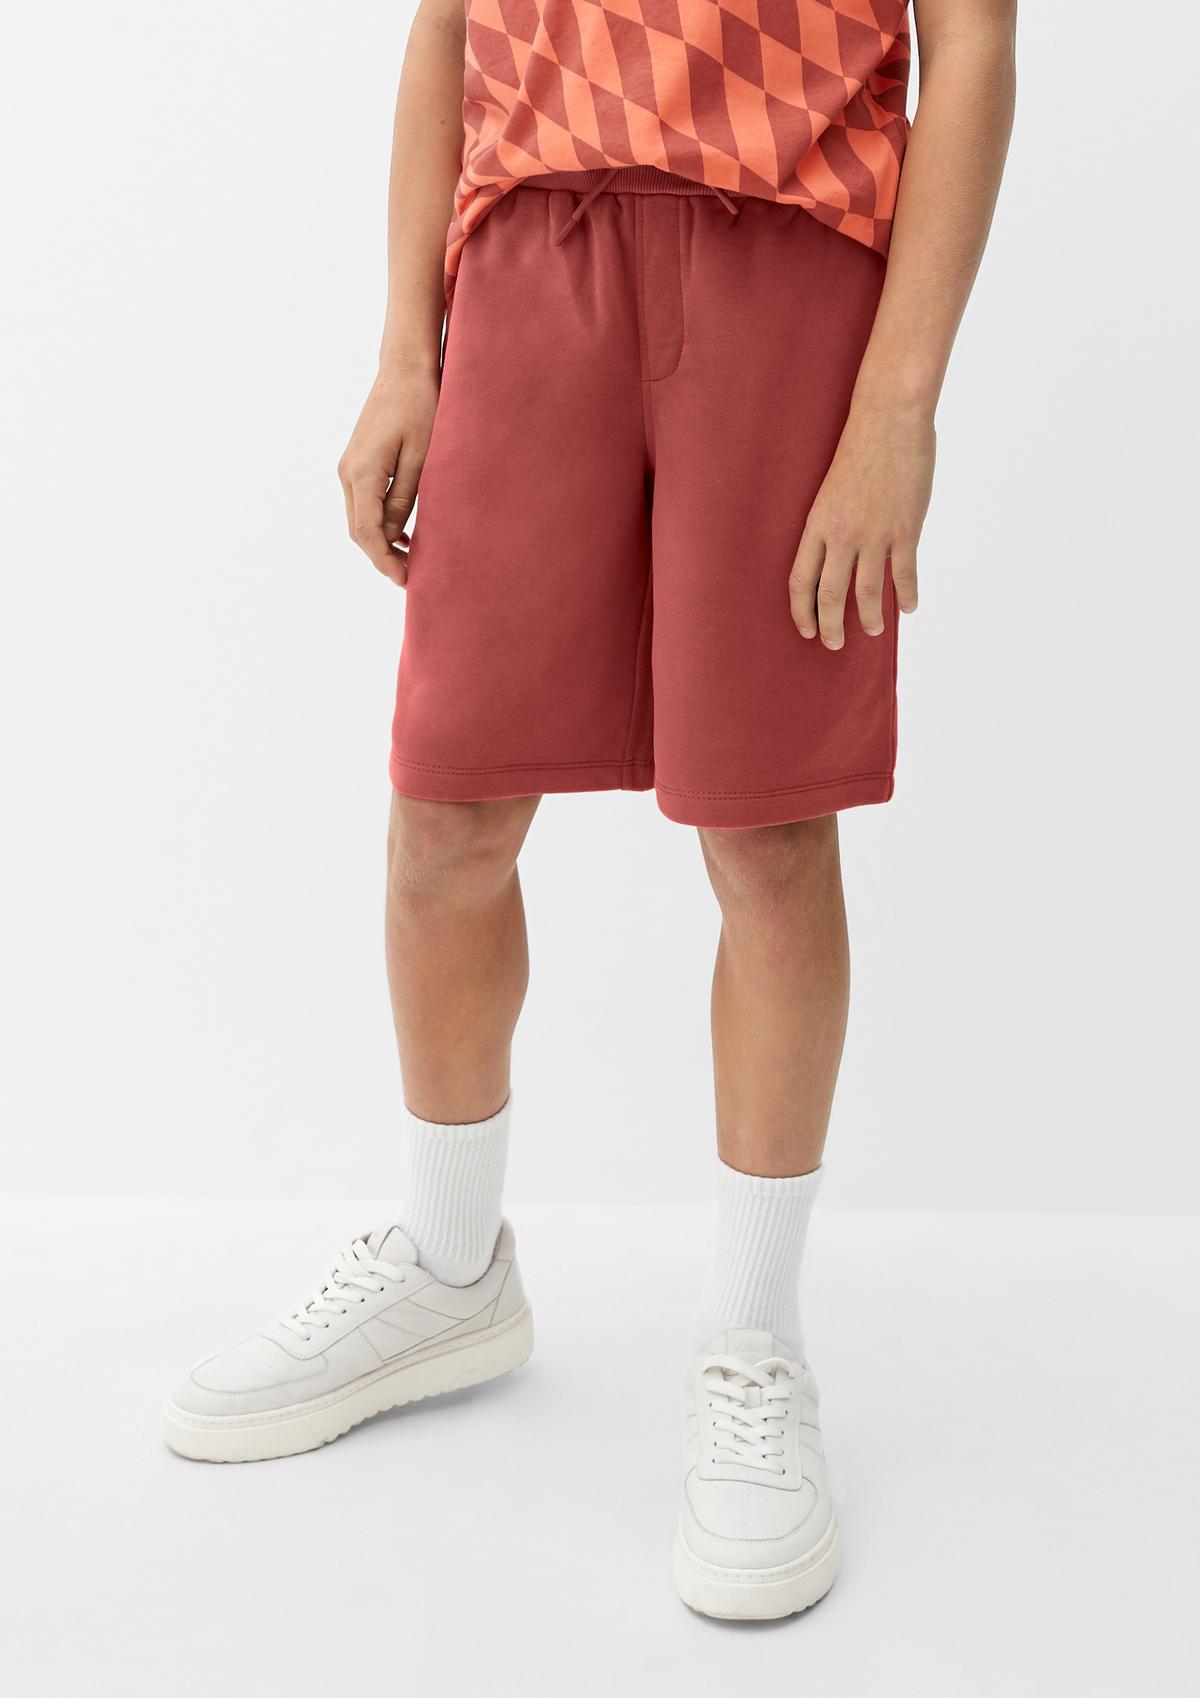 s.Oliver Relaxed: Softe Sweatshorts